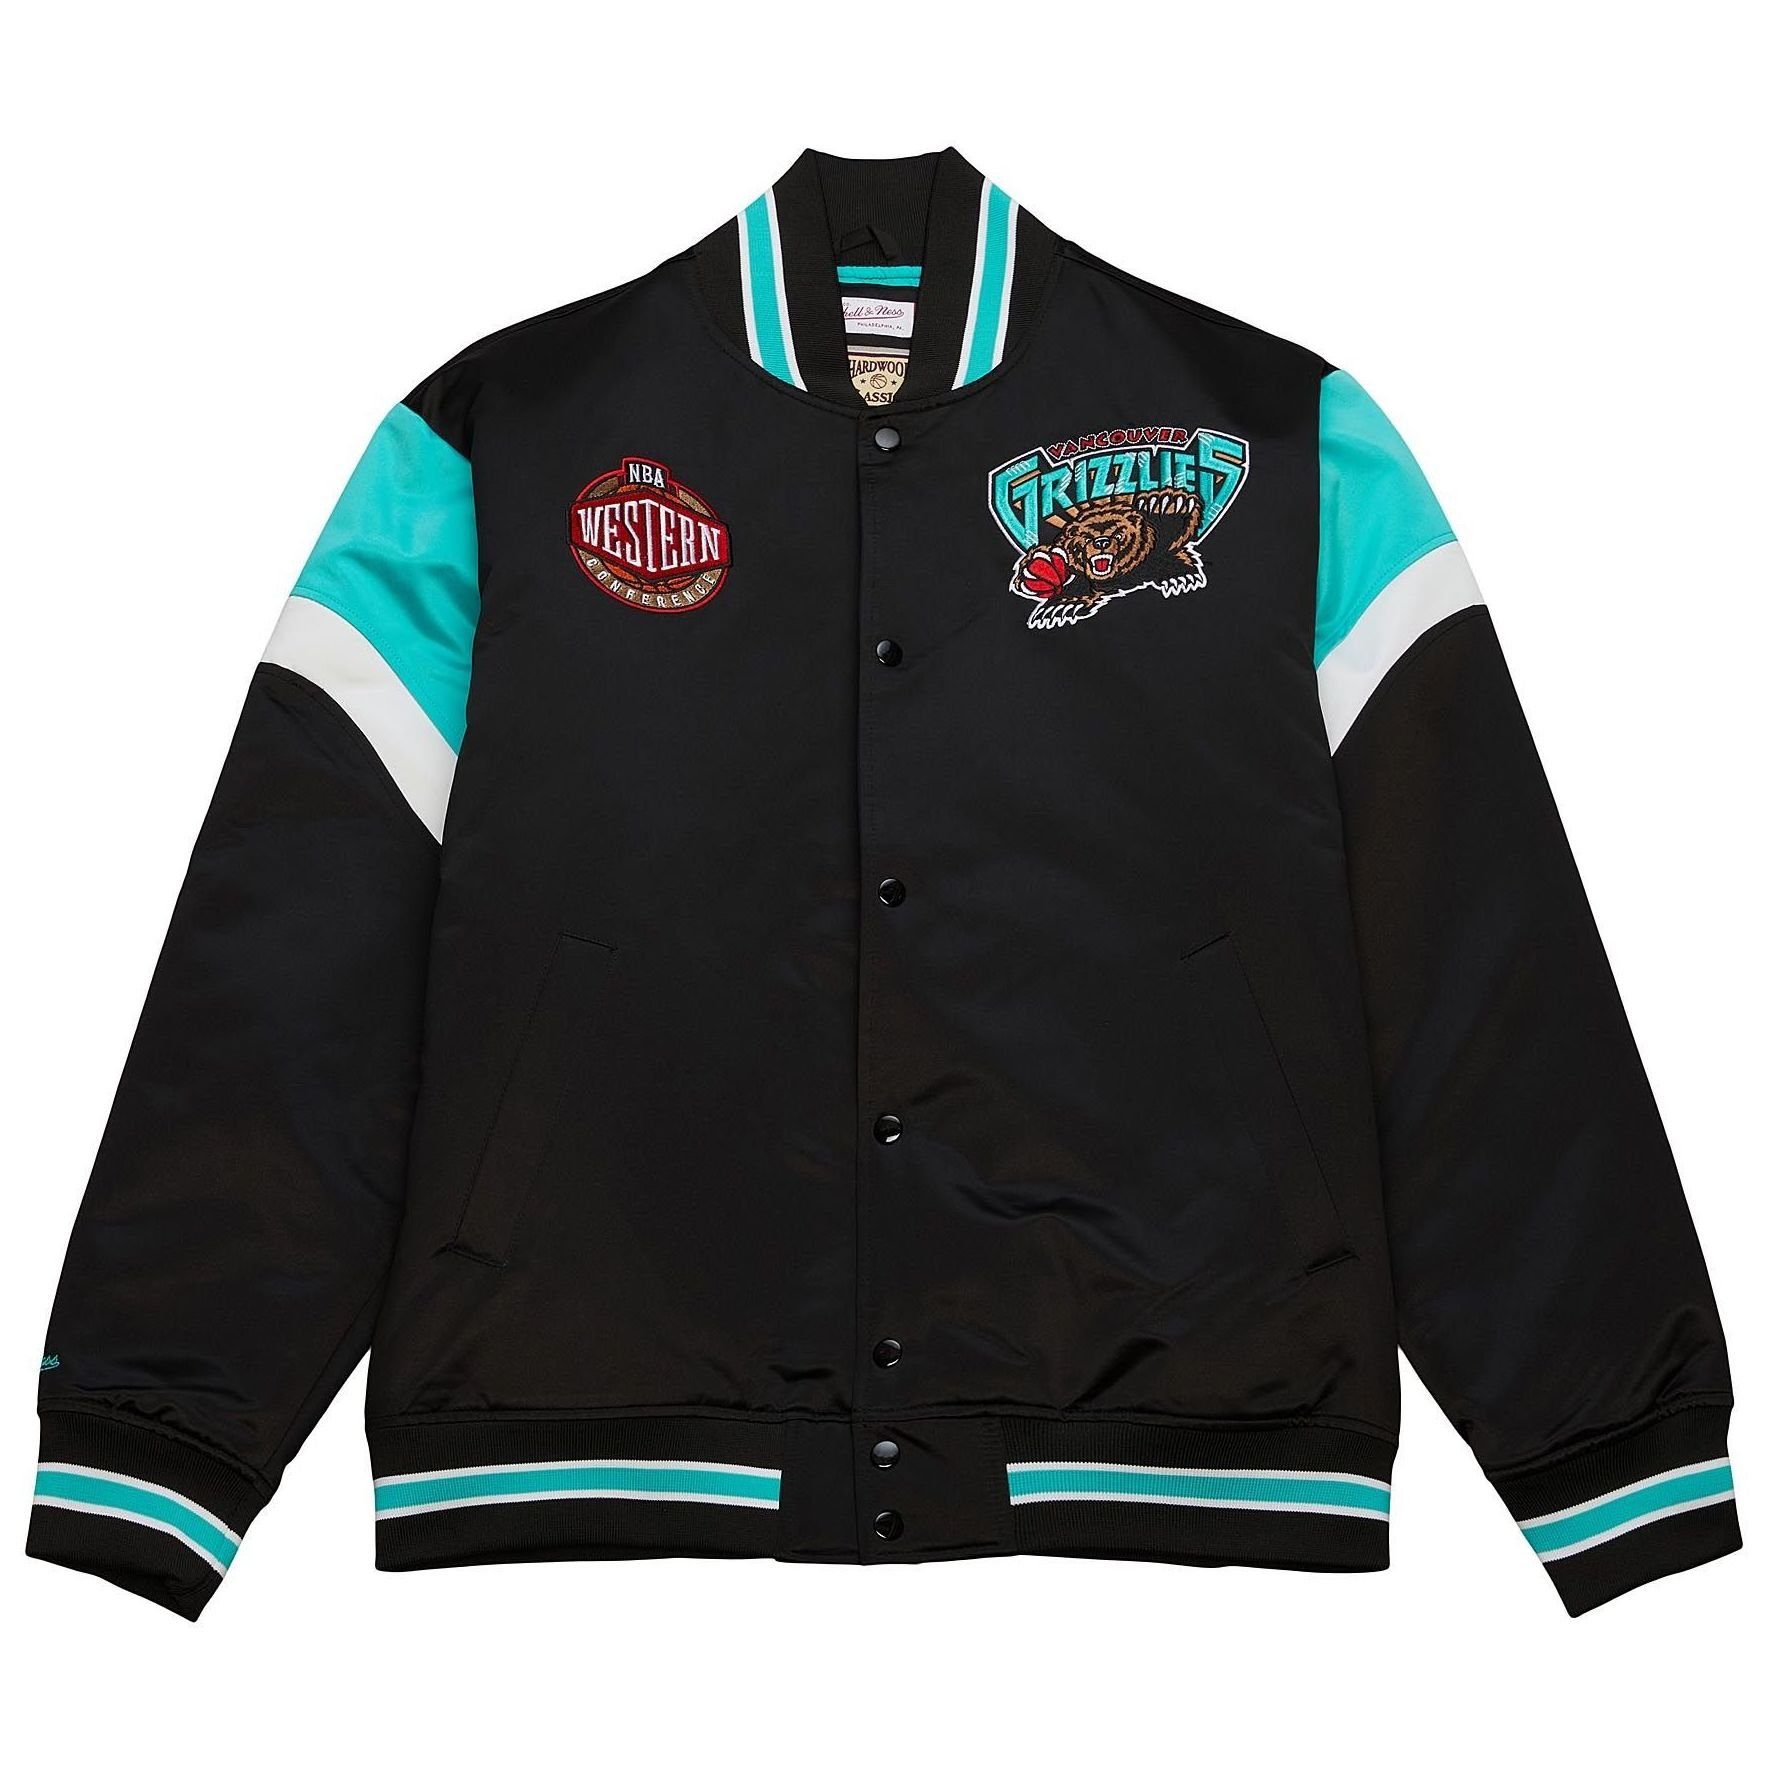 Ness Satin Grizzlies Heavyweight Vancouver Mitchell & NBA Collegejacke